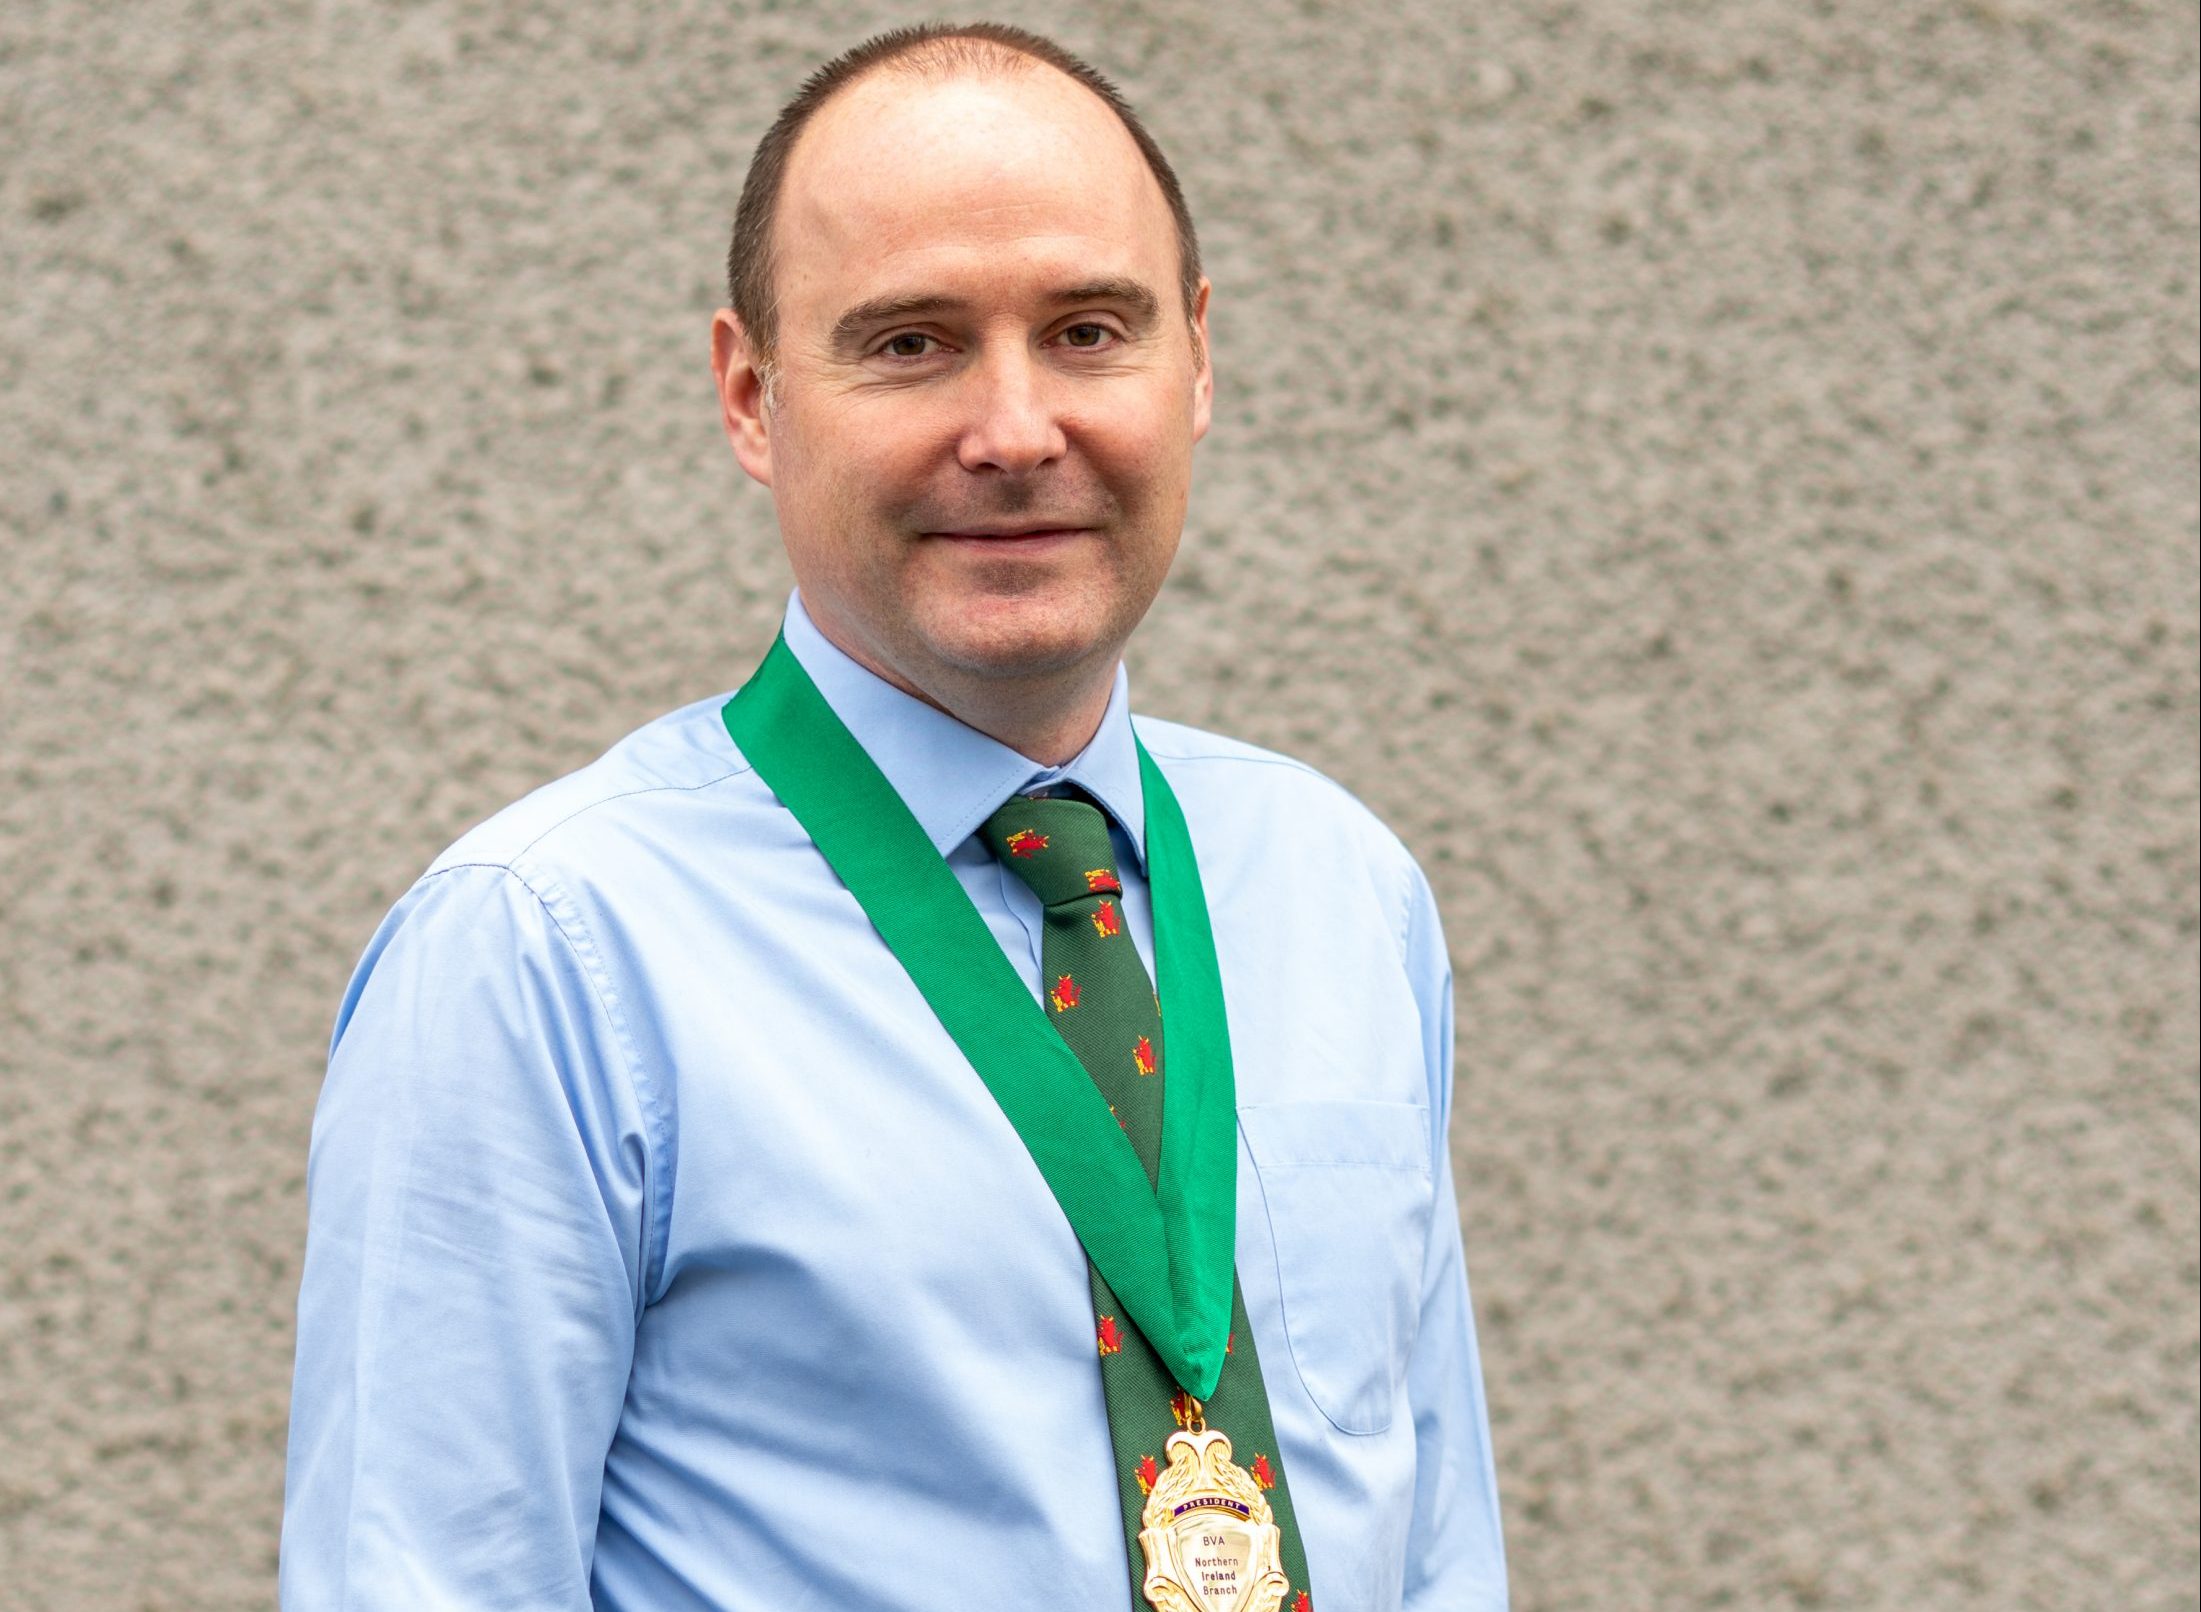 New joint president elected for NIVA and BVA Northern Ireland branch